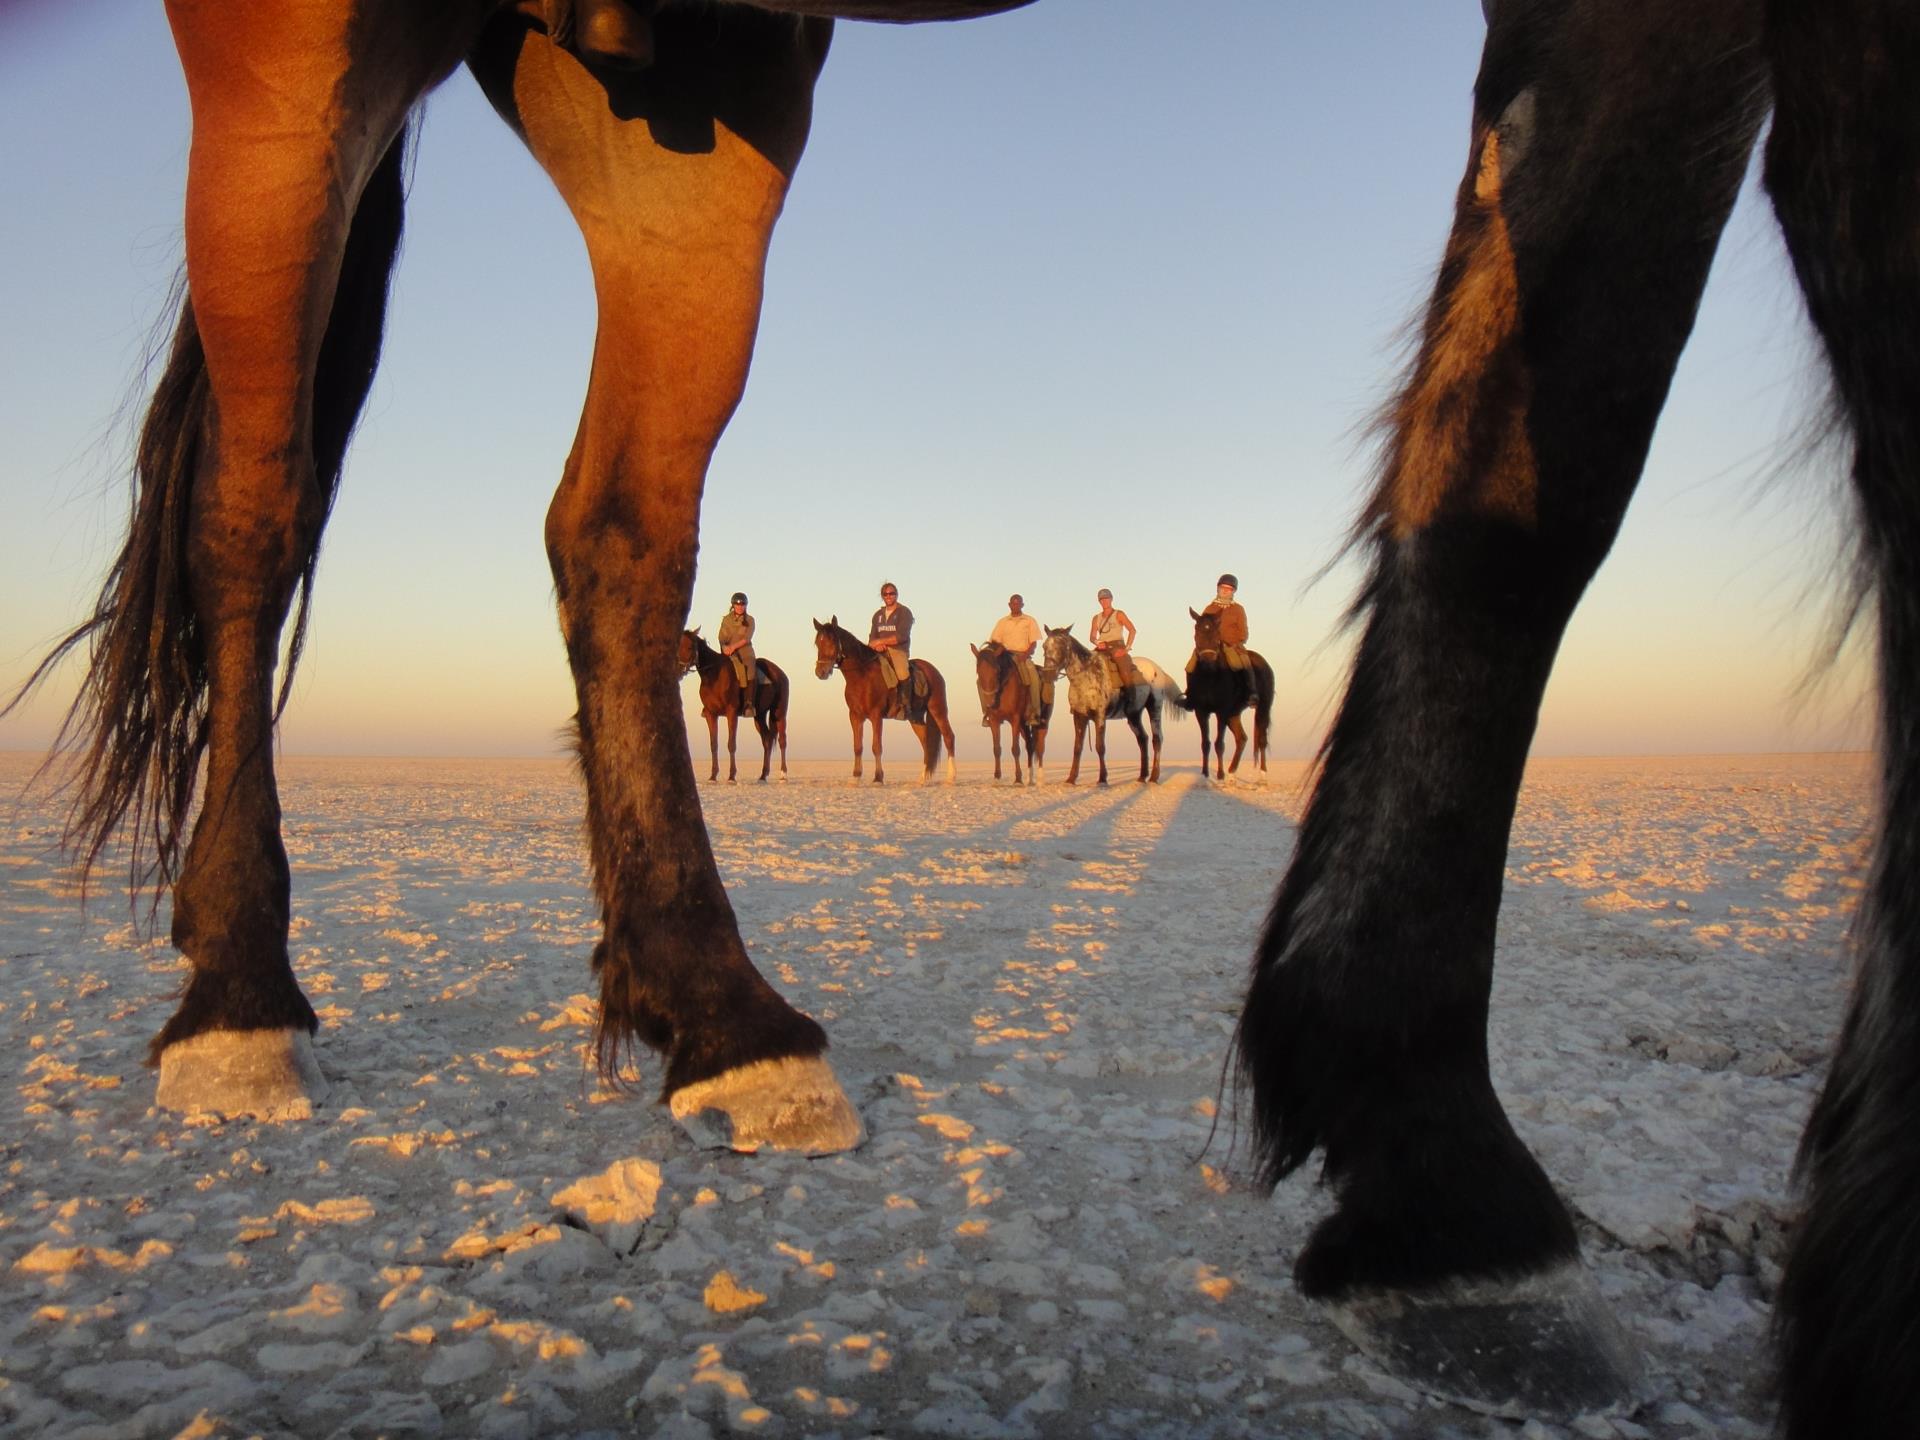 Riding in the Makgadikgadi pans - The Delta and Salt Pans